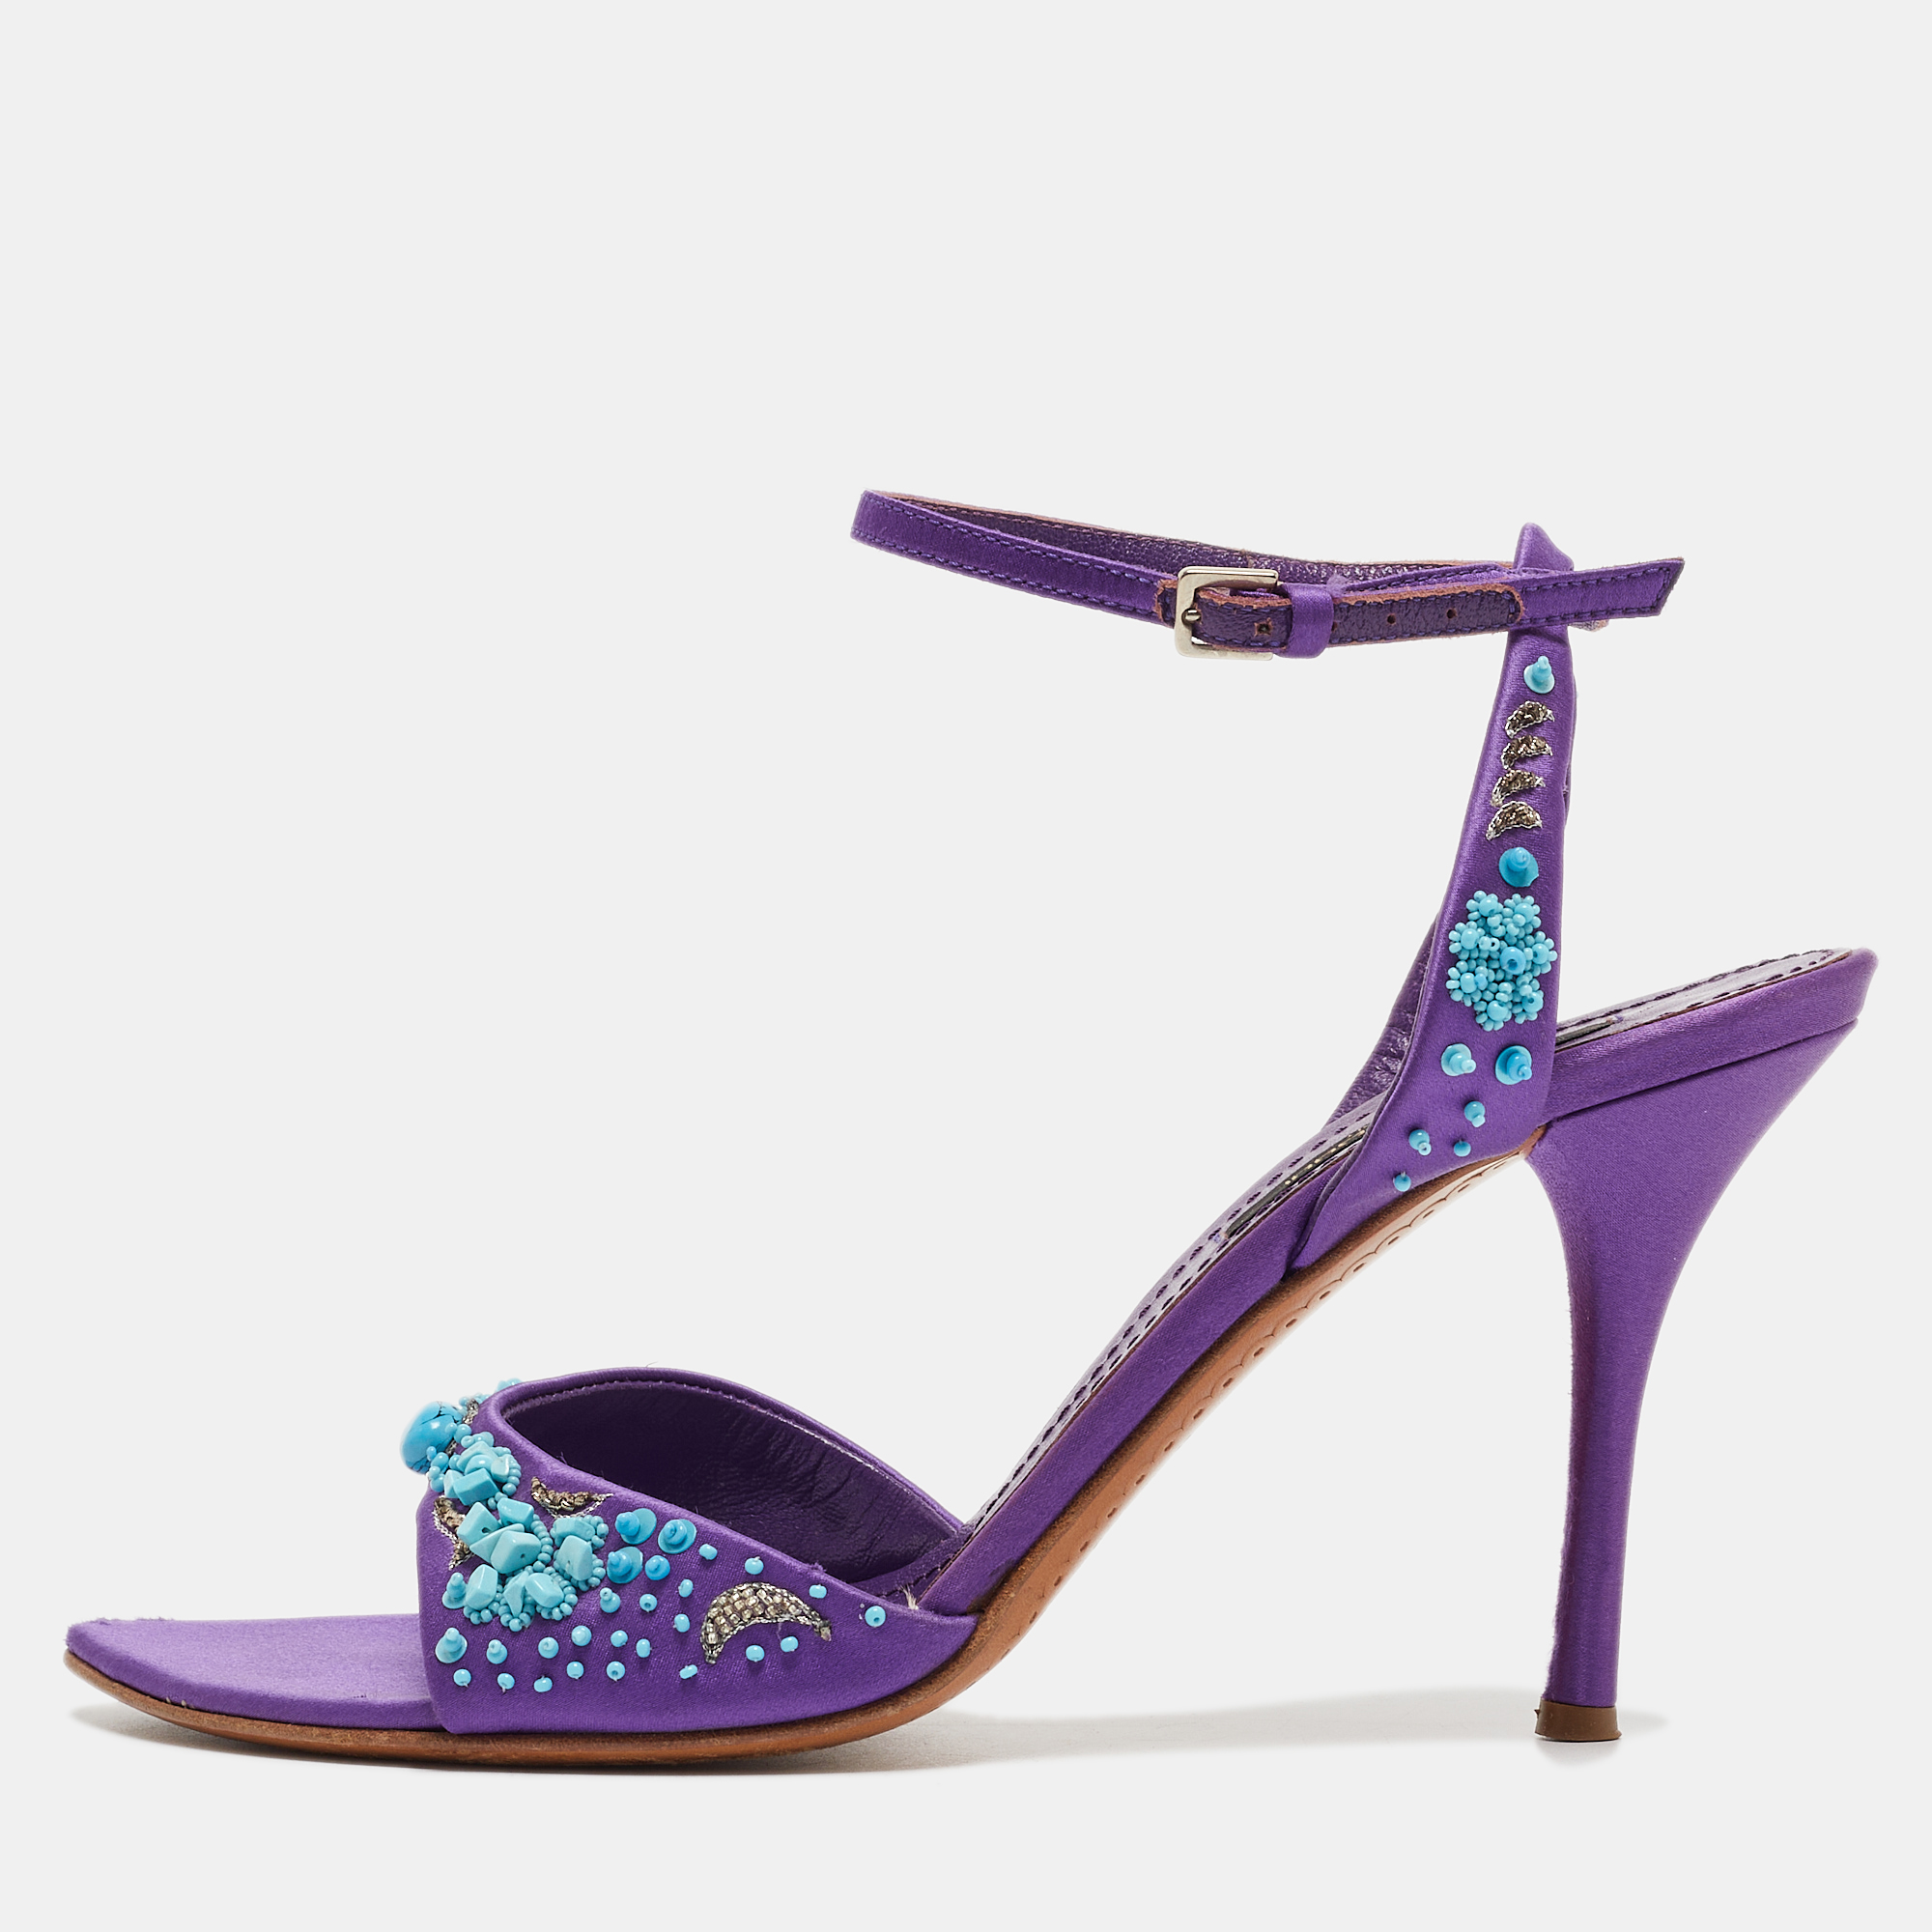 Pre-owned Sergio Rossi Purple Satin Embellished Ankle Strap Sandals Size 39.5